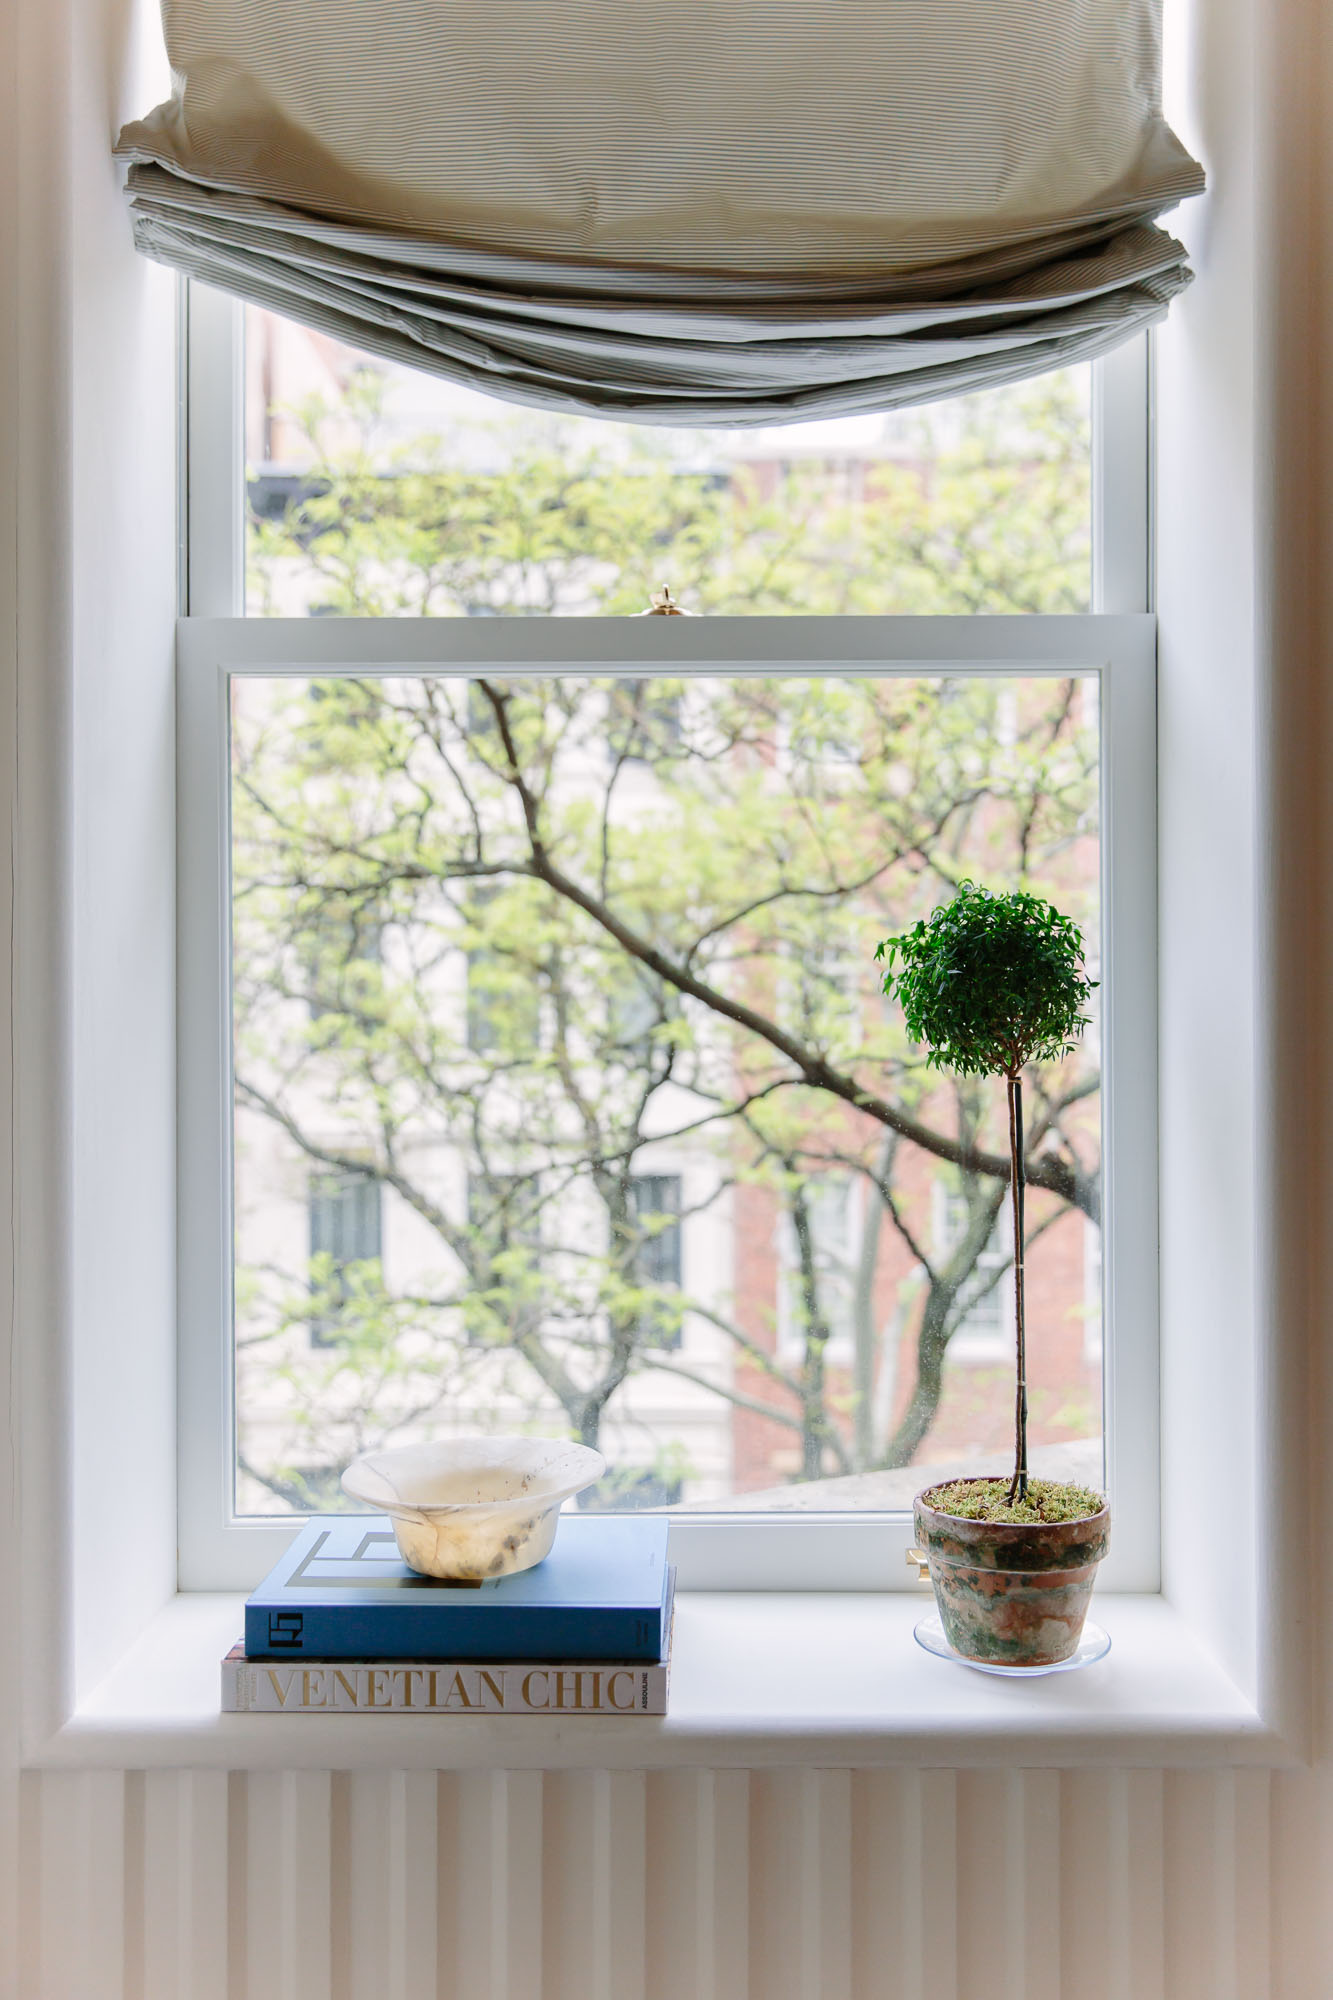 Kips Bay Showhouse featured by top New York City blog York Avenue